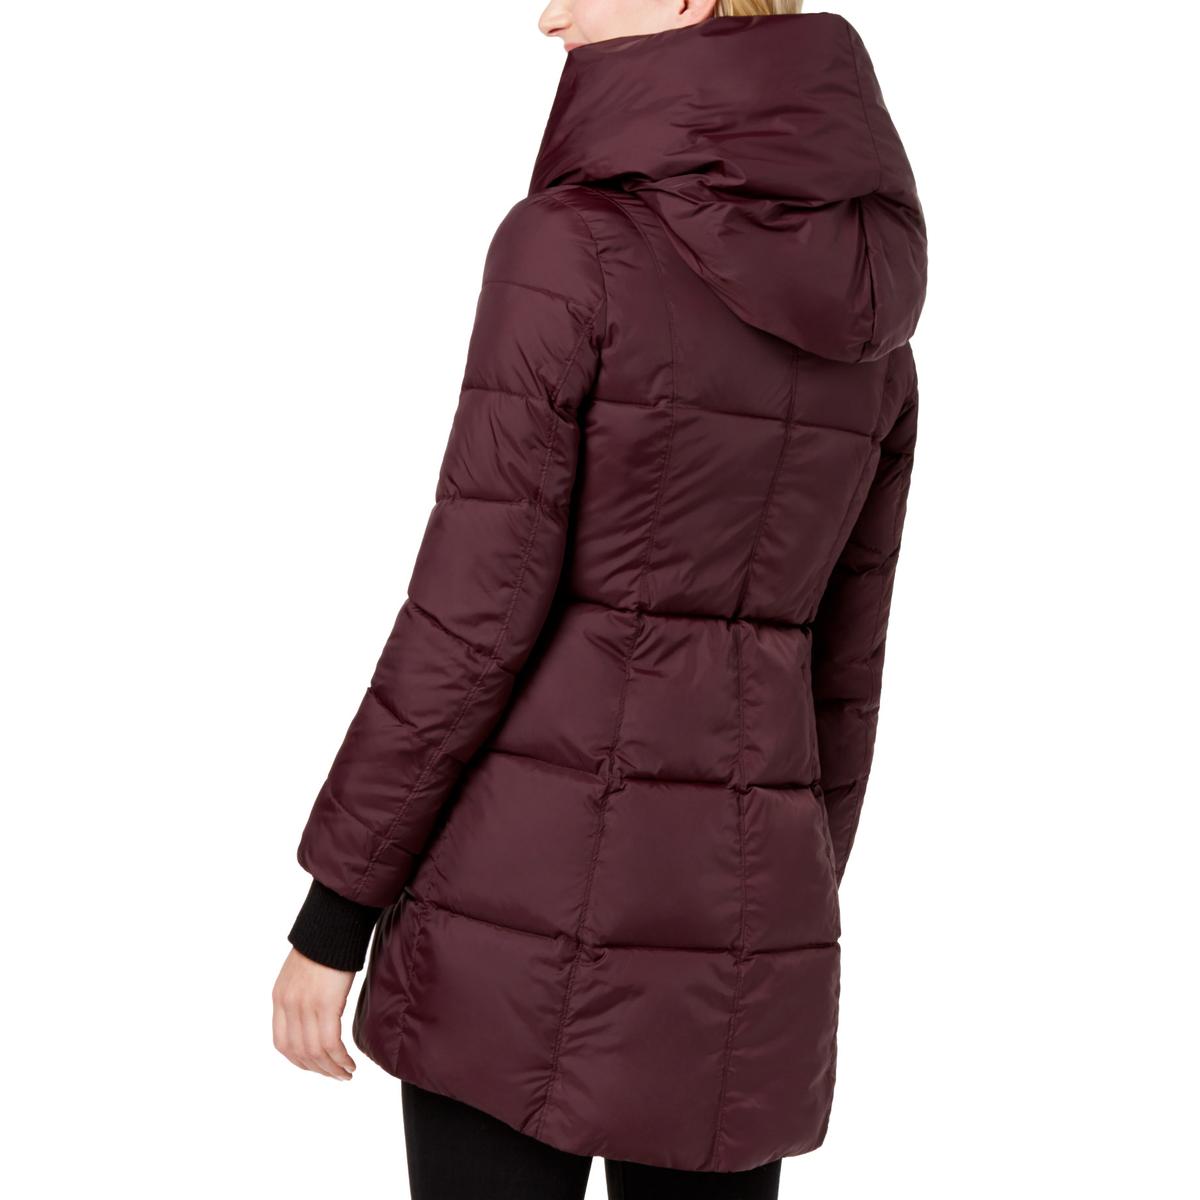 French Connection Women's Quilted Asymmetrical Hem Hooded Winter Puffe